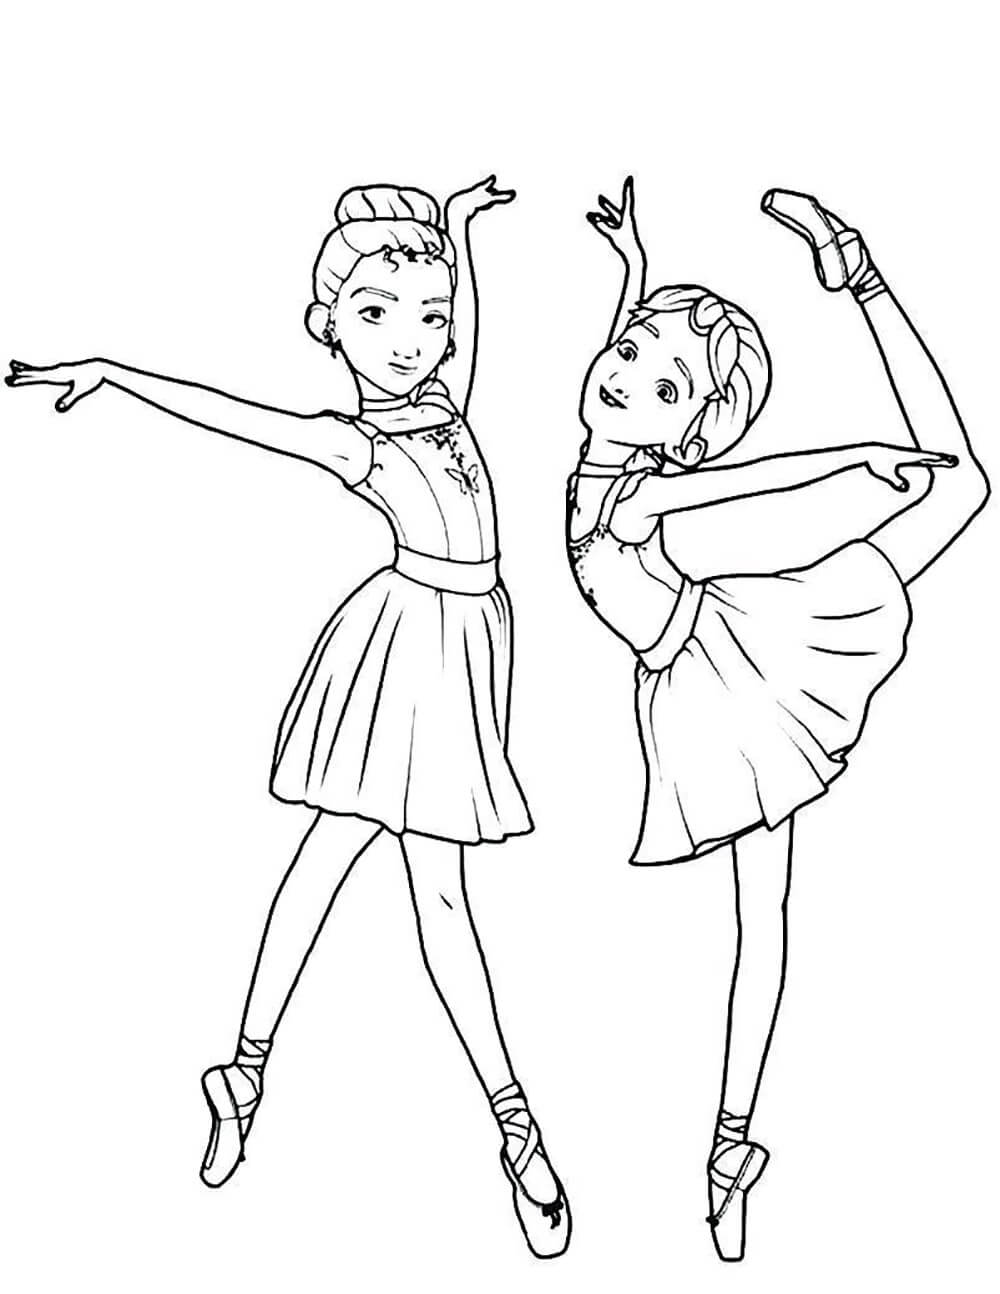 Cute Ballerina Coloring Page - Free Printable Coloring Pages for Kids